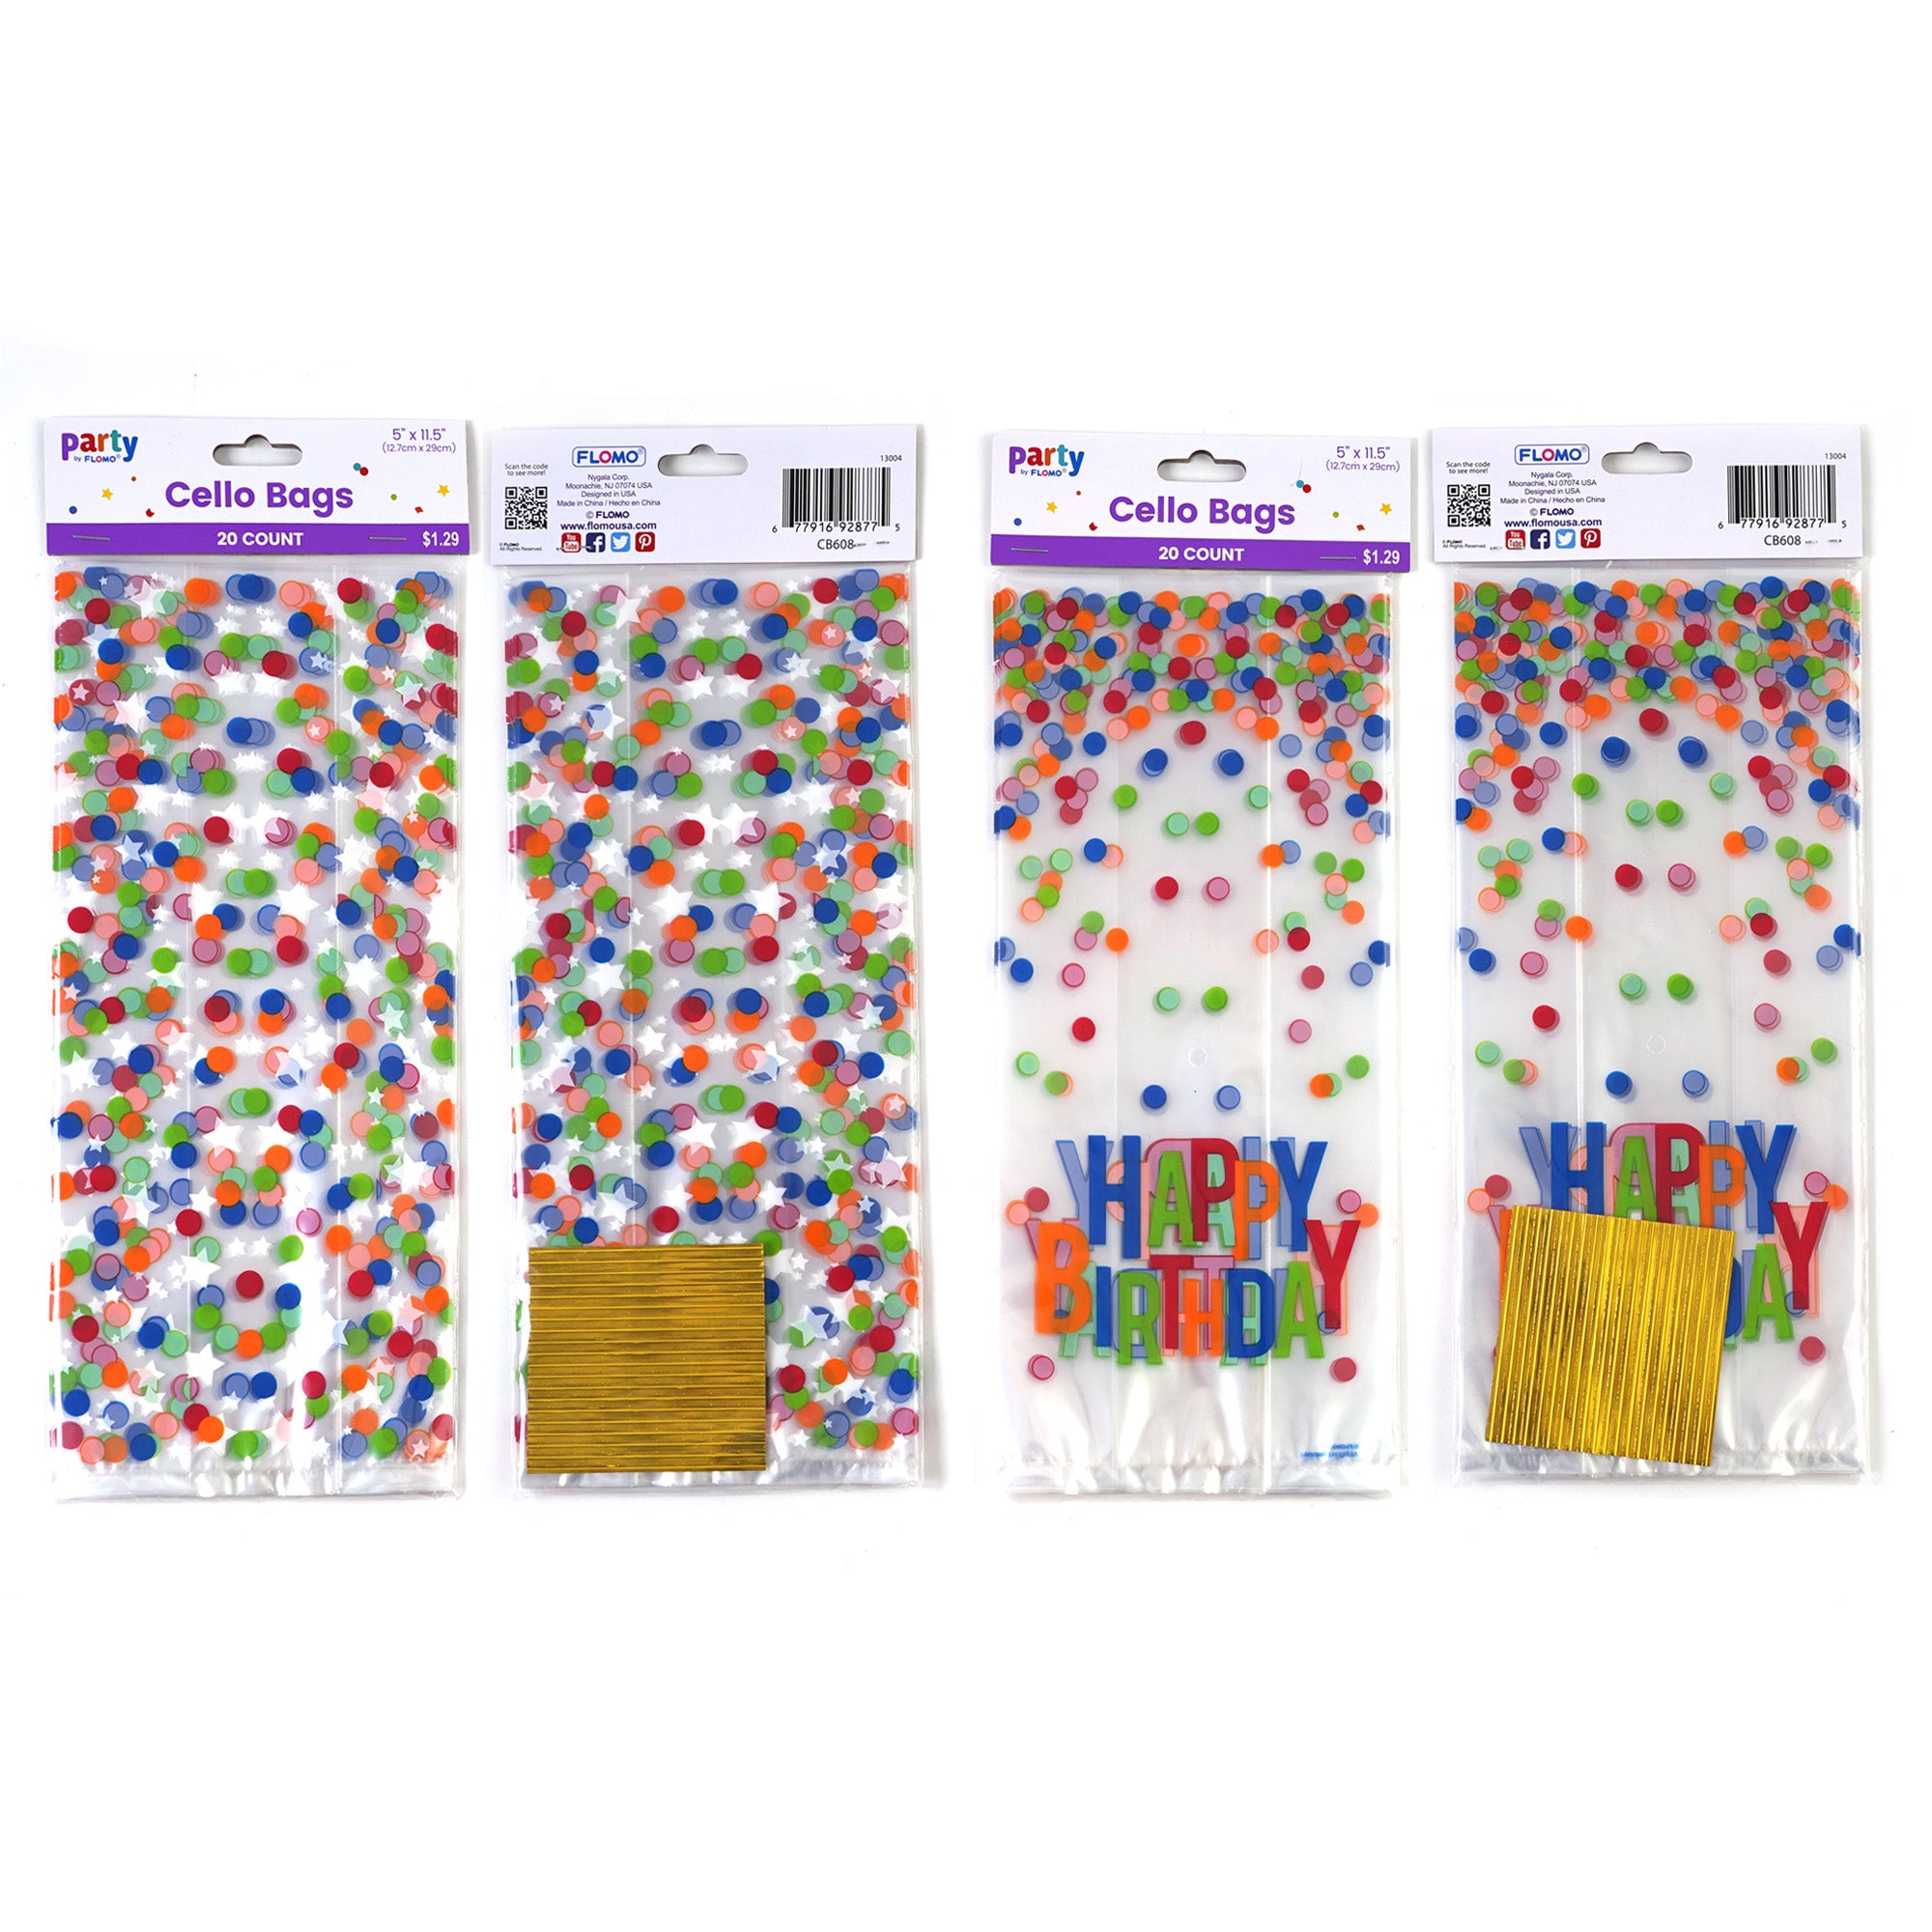 MOD-PAC Cello Bags for candy and treats